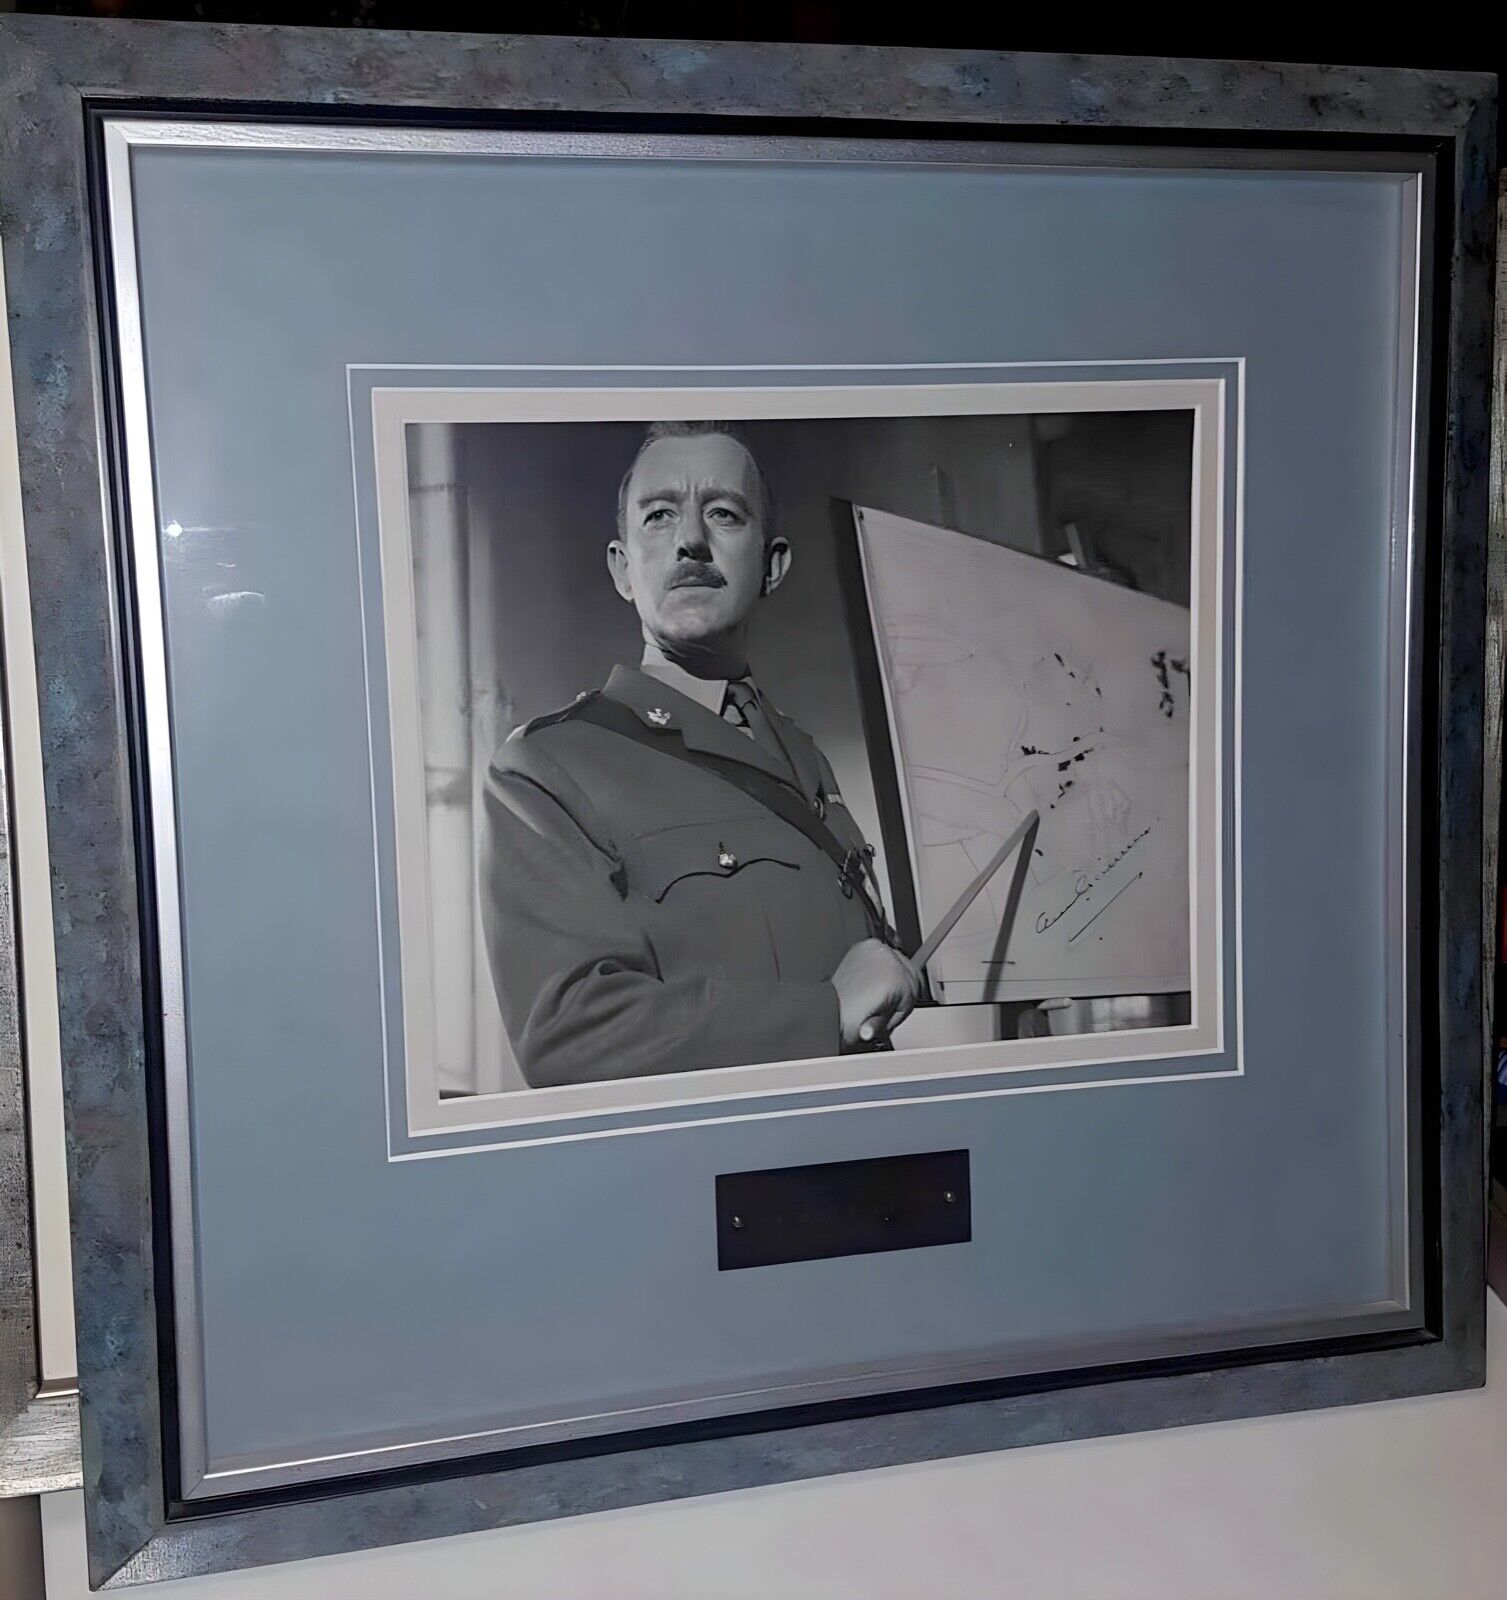 Alec Guiness Signed Autograph at a B&W photo in frame with glass 